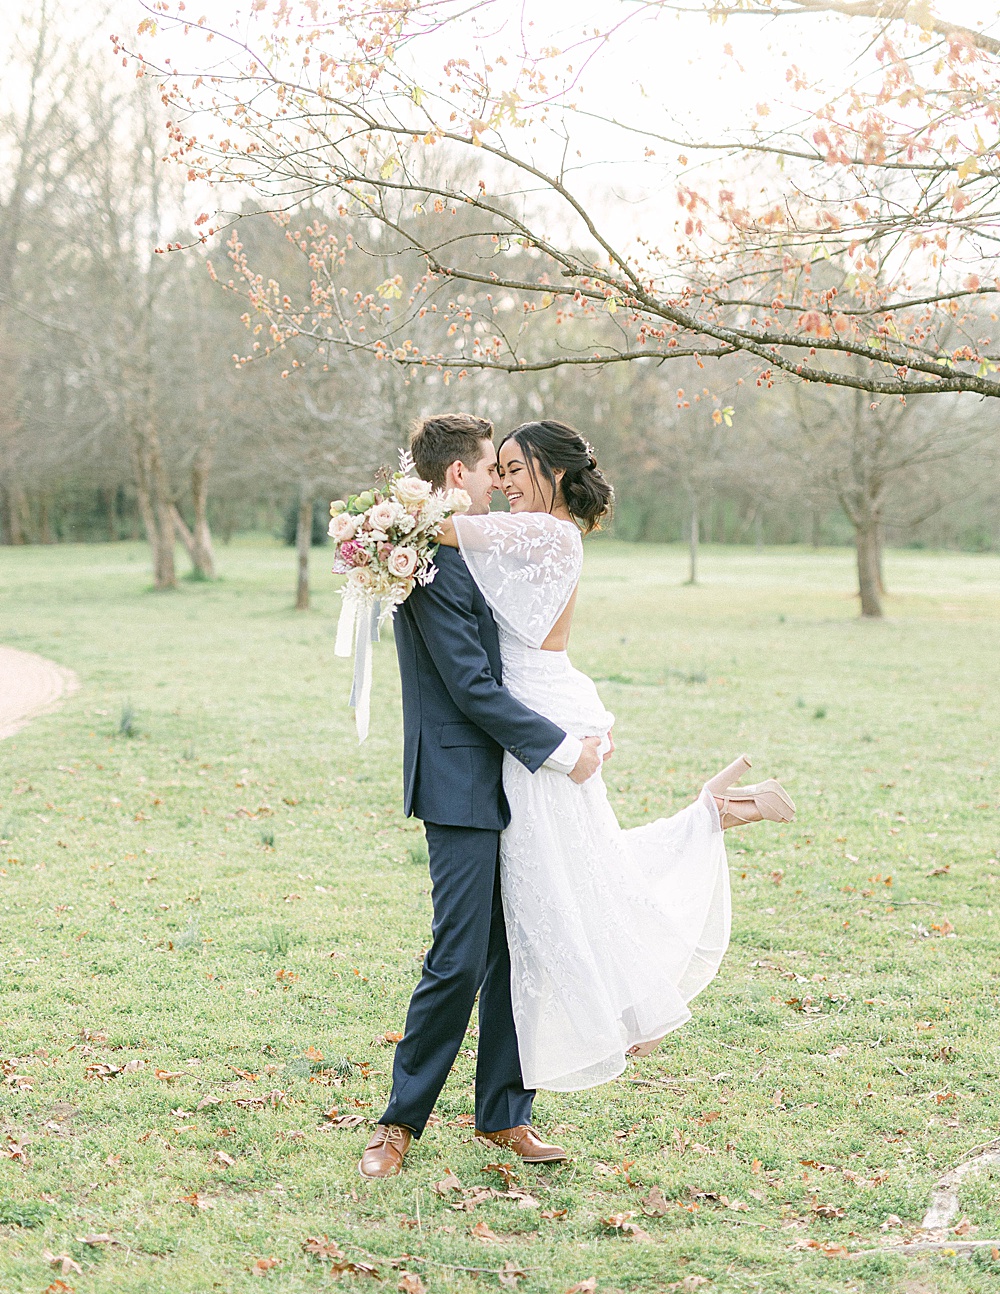 Romantic Spring wedding photos at Whittier Mill Park by Laura Anne Watson